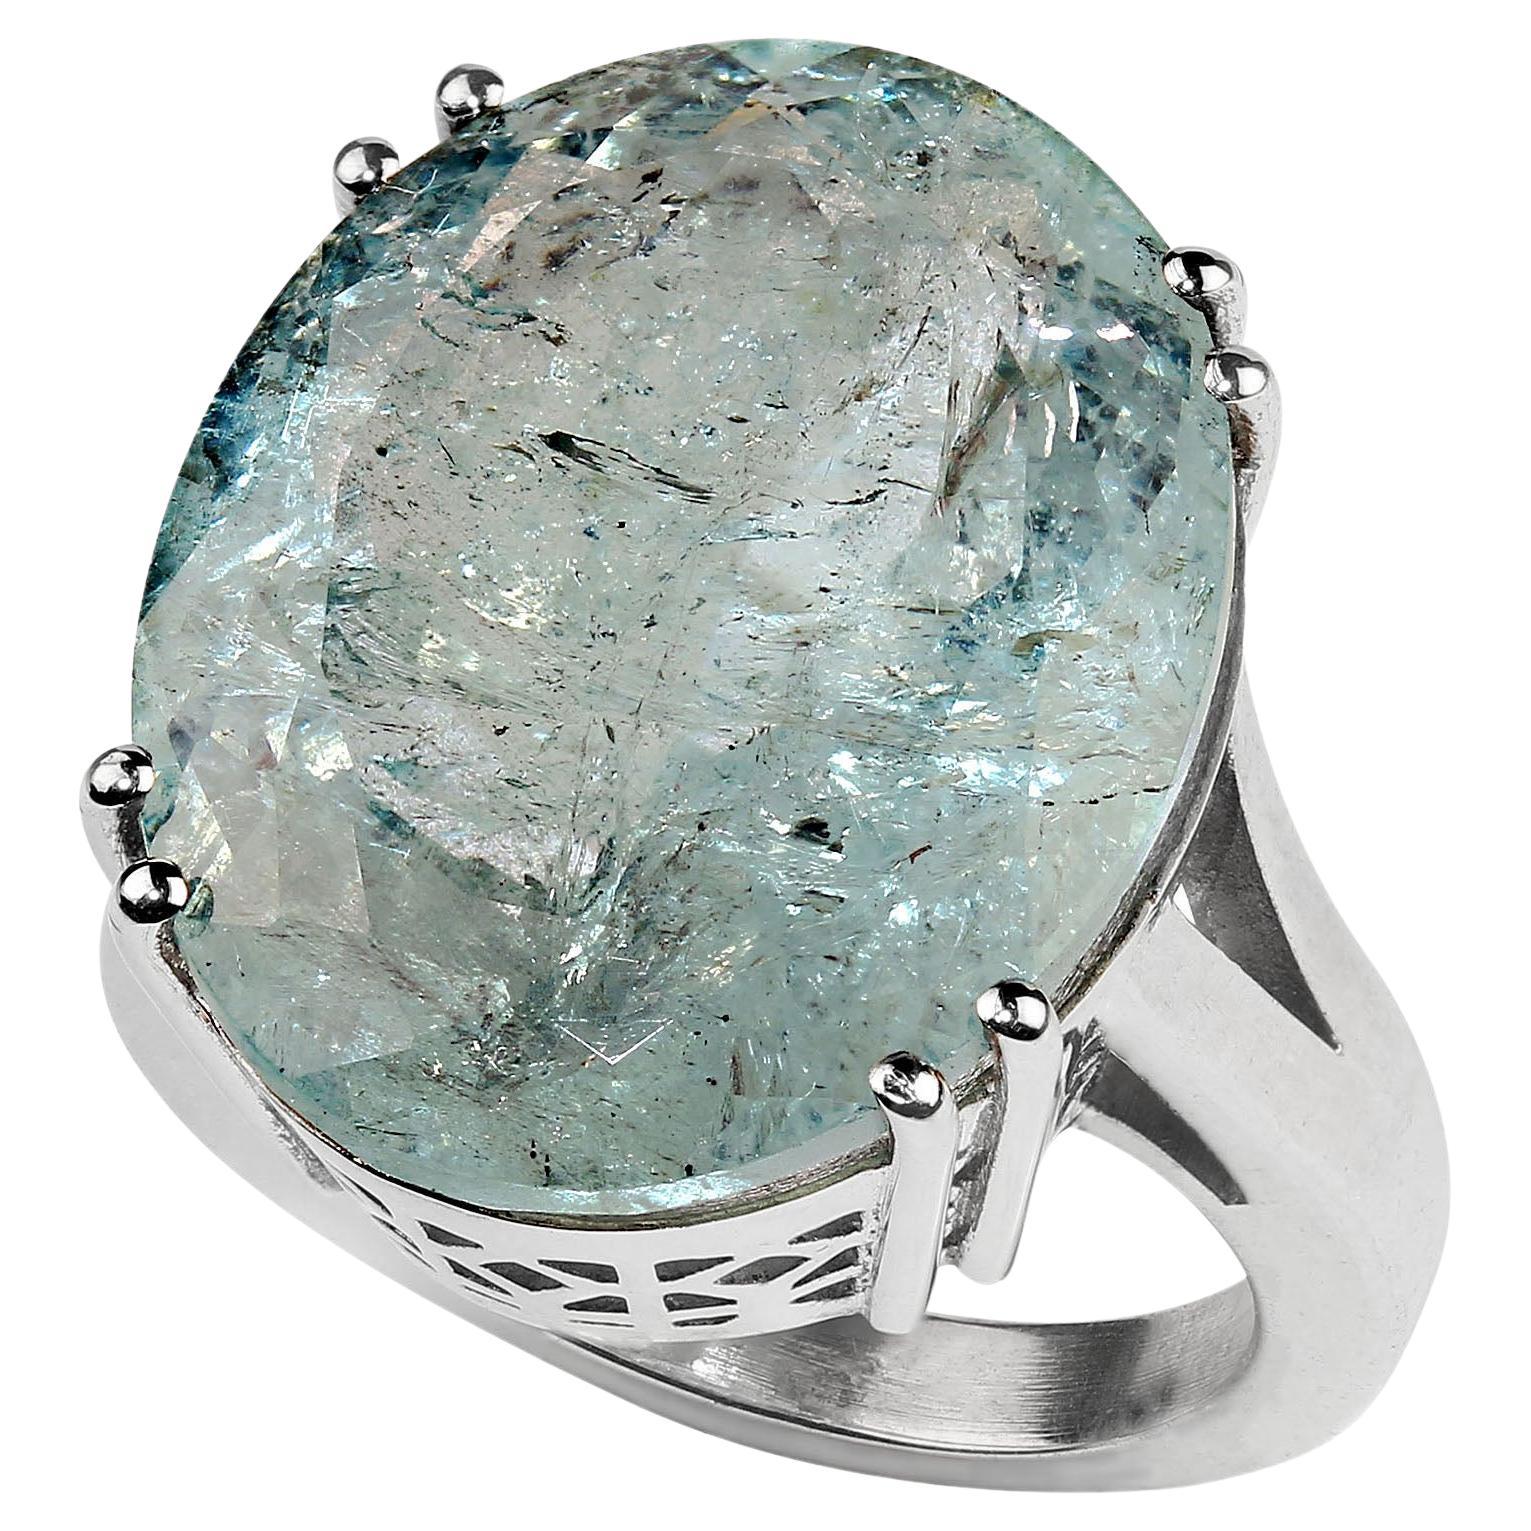 Elegant Cocktail ring of huge blue-green Beryl set in a custom made Sterling Silver setting. This 25ct gemstone features all the usual inclusions found in the beryl family. Also, in the Beryl family you will find in addition to aquamarine, emerald,